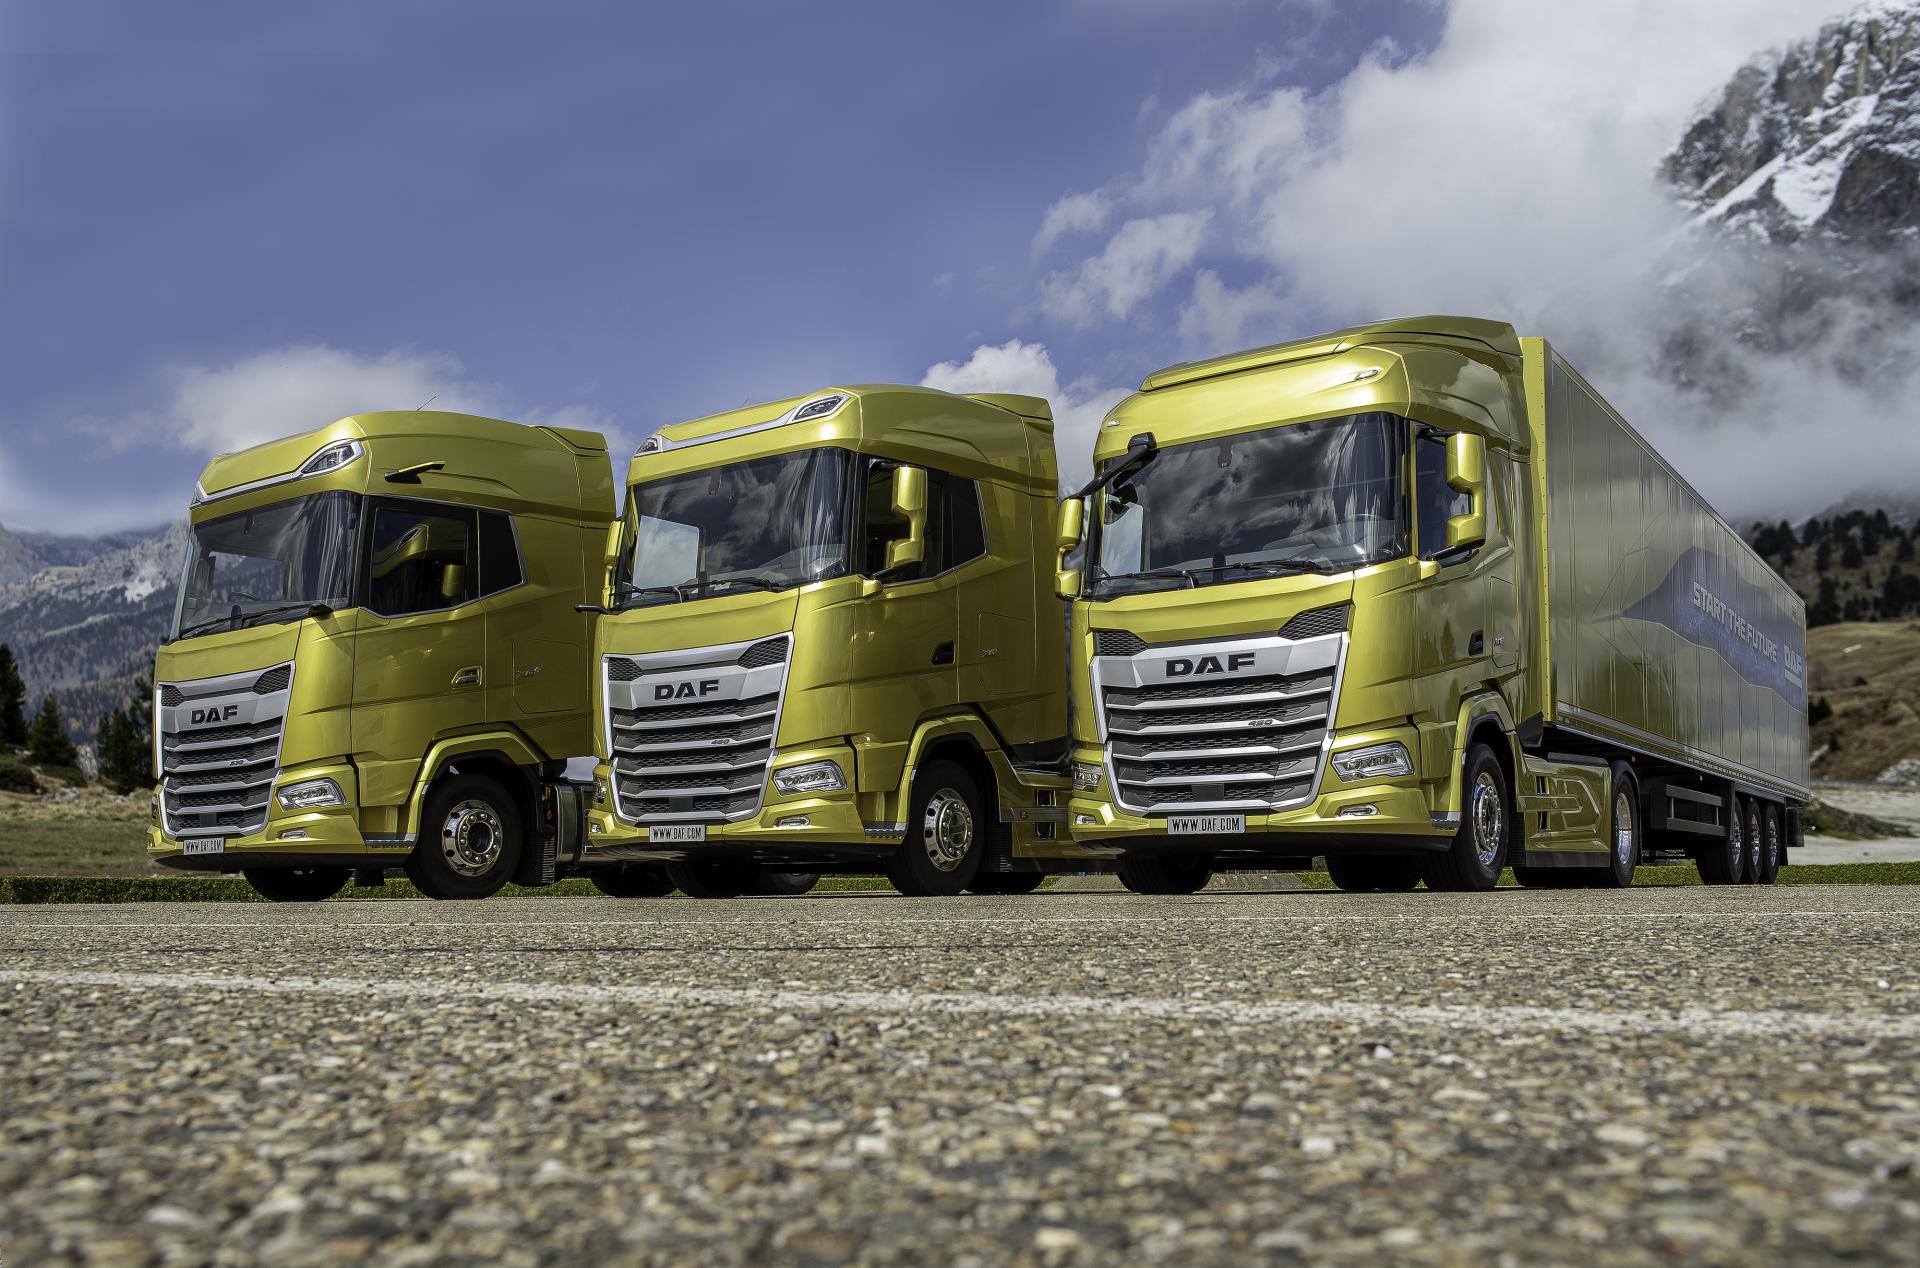 01 the new generation daf trucks 2021 from left to right xgplus xg and xf